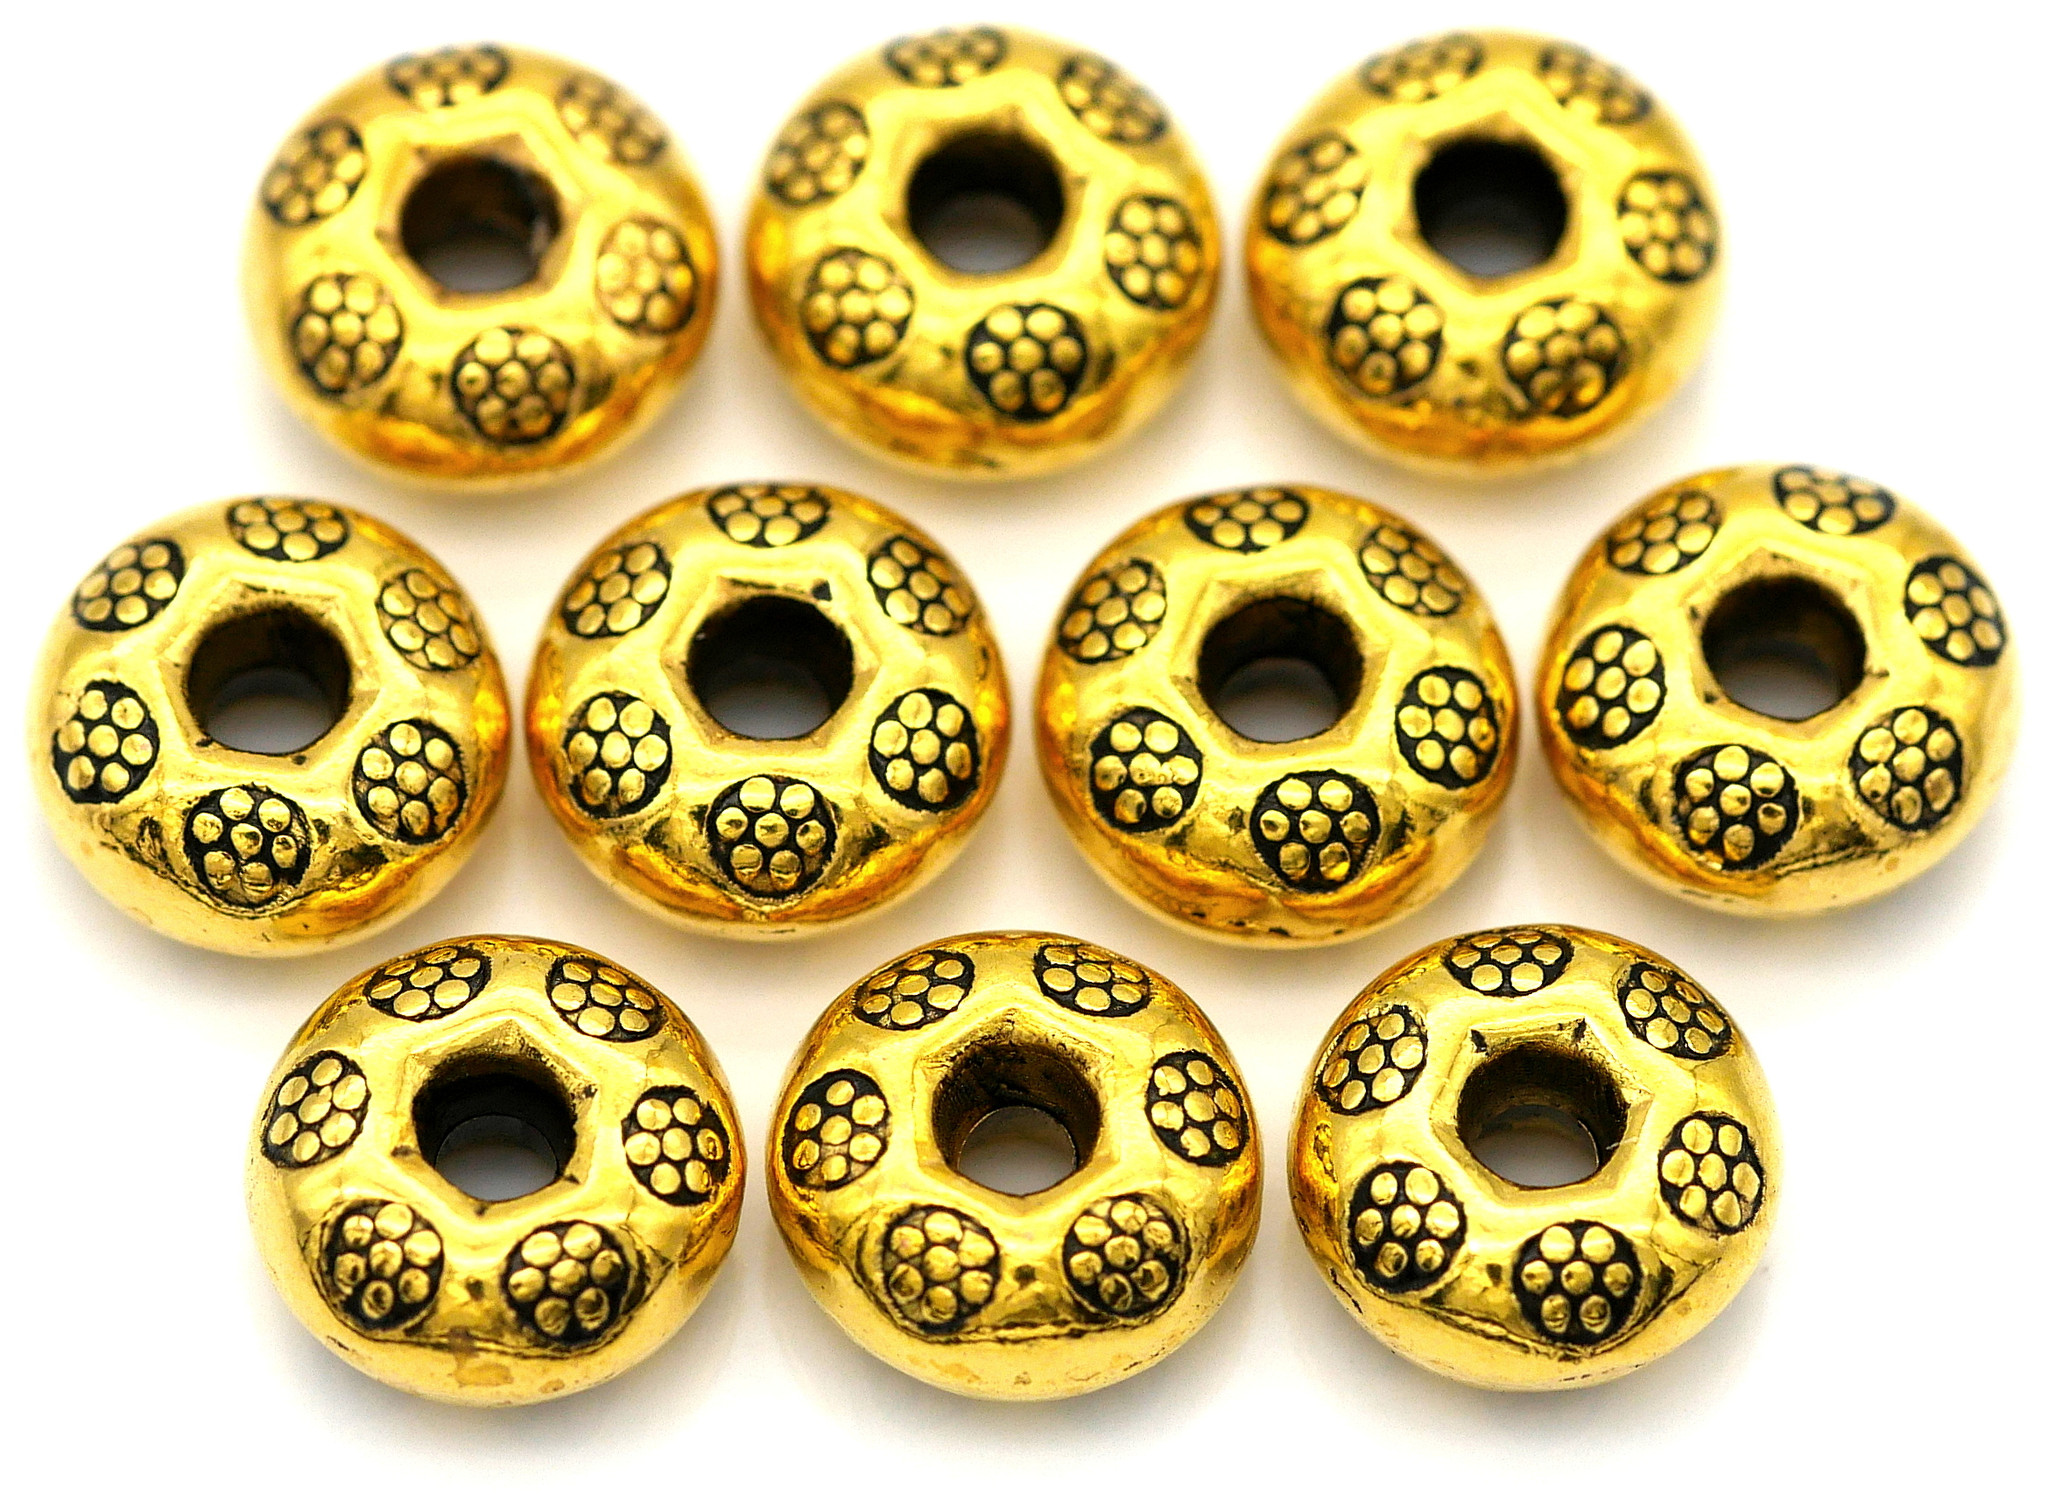 10pc 9.5x5mm Flower-Pattered Rondelle Spacer Beads, Antique Gold - Bead Box  Bargains